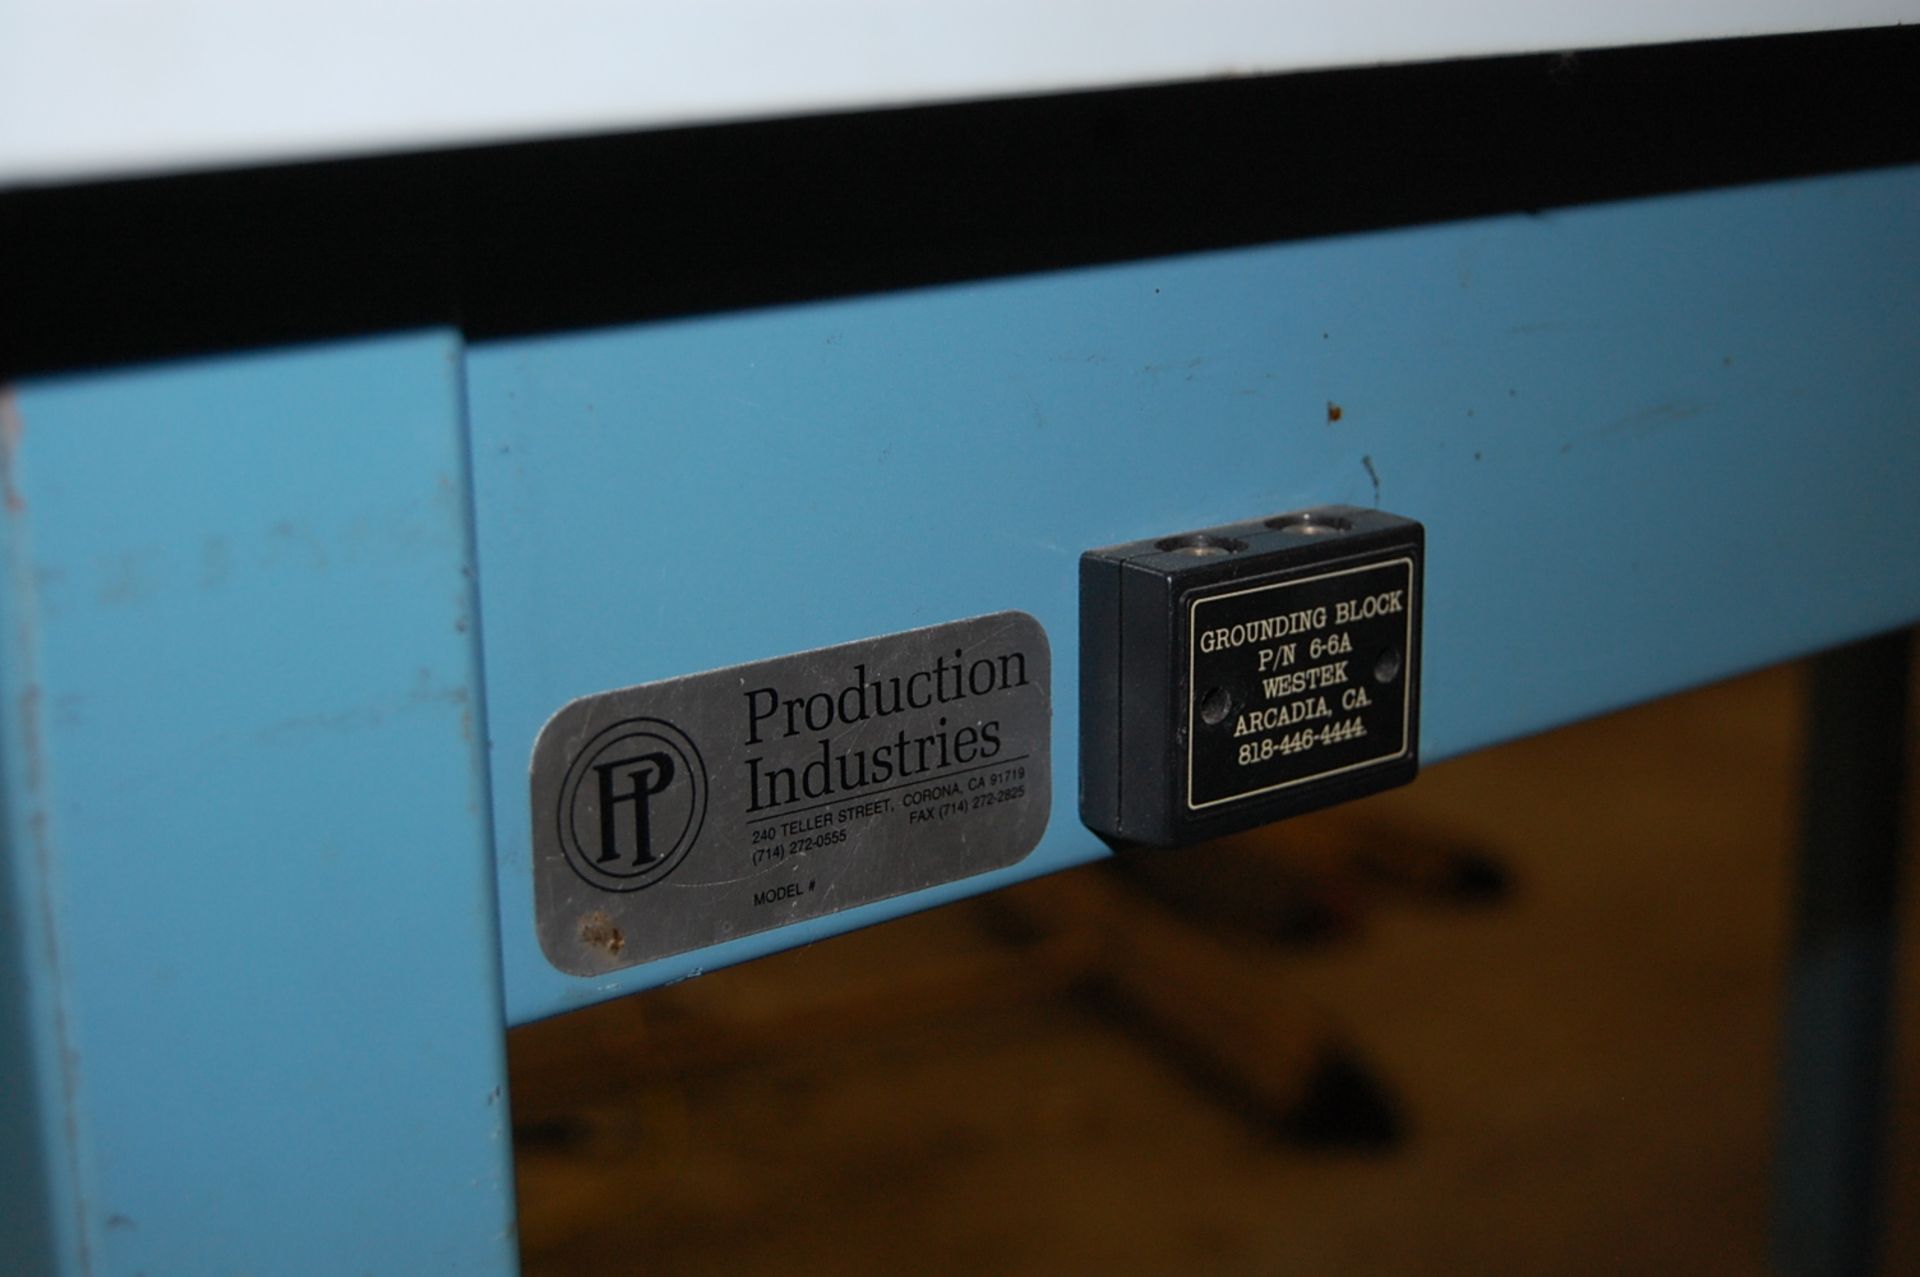 Model Production Industries 60" W x 36" D x 32" H Work Bench - Image 3 of 3